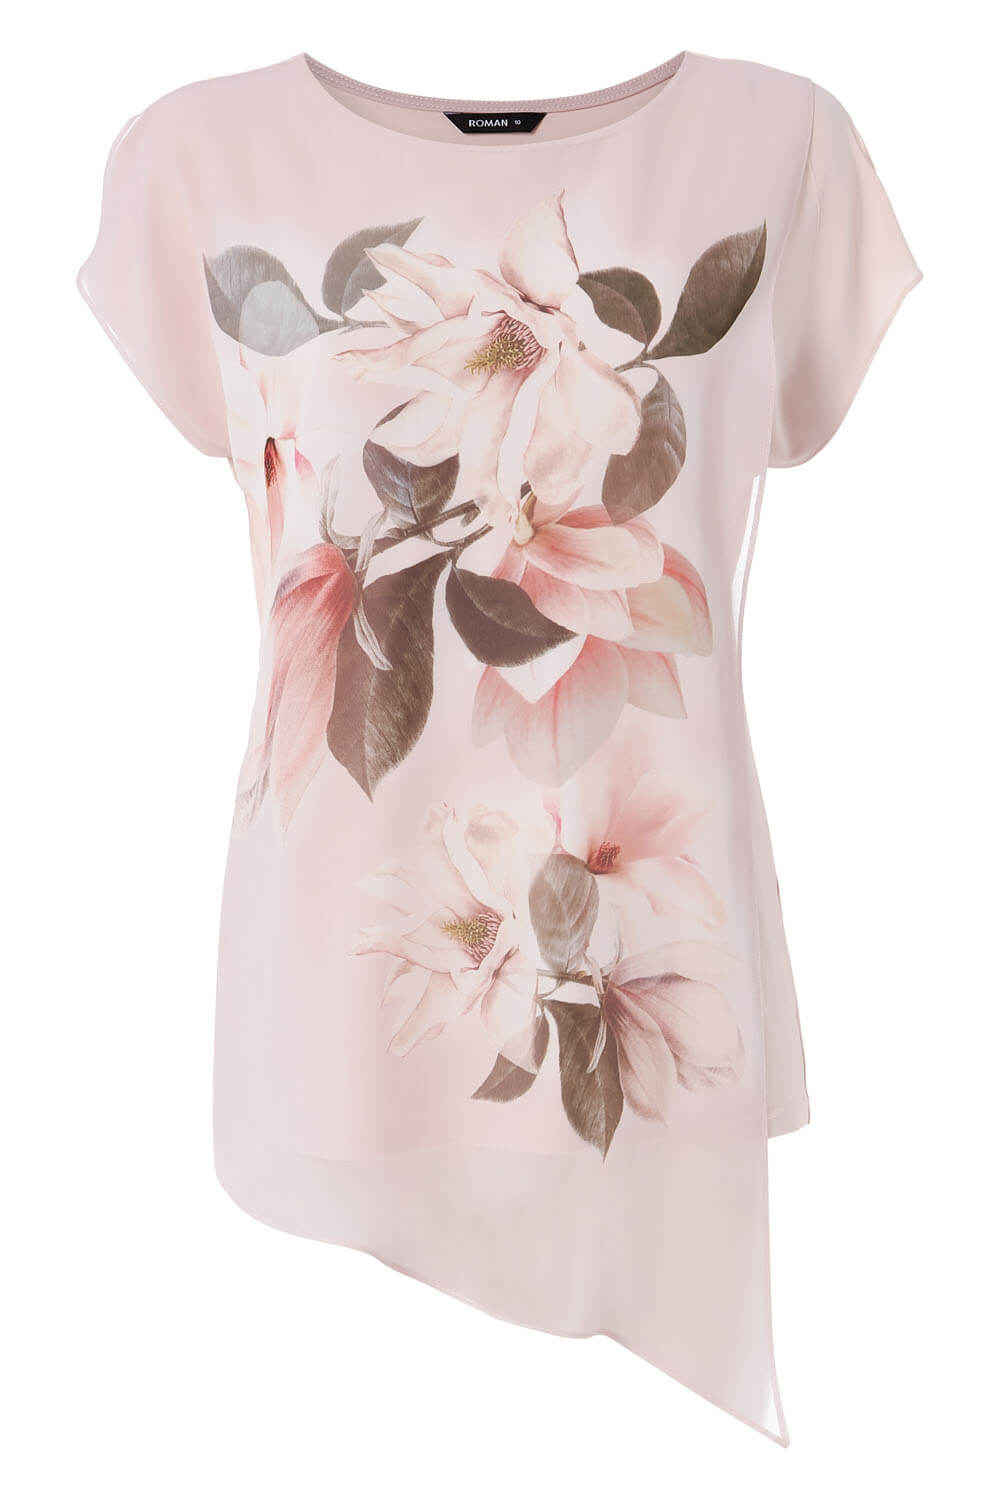 PINK Asymmetric Chiffon Overlay Floral Top, Image 5 of 5